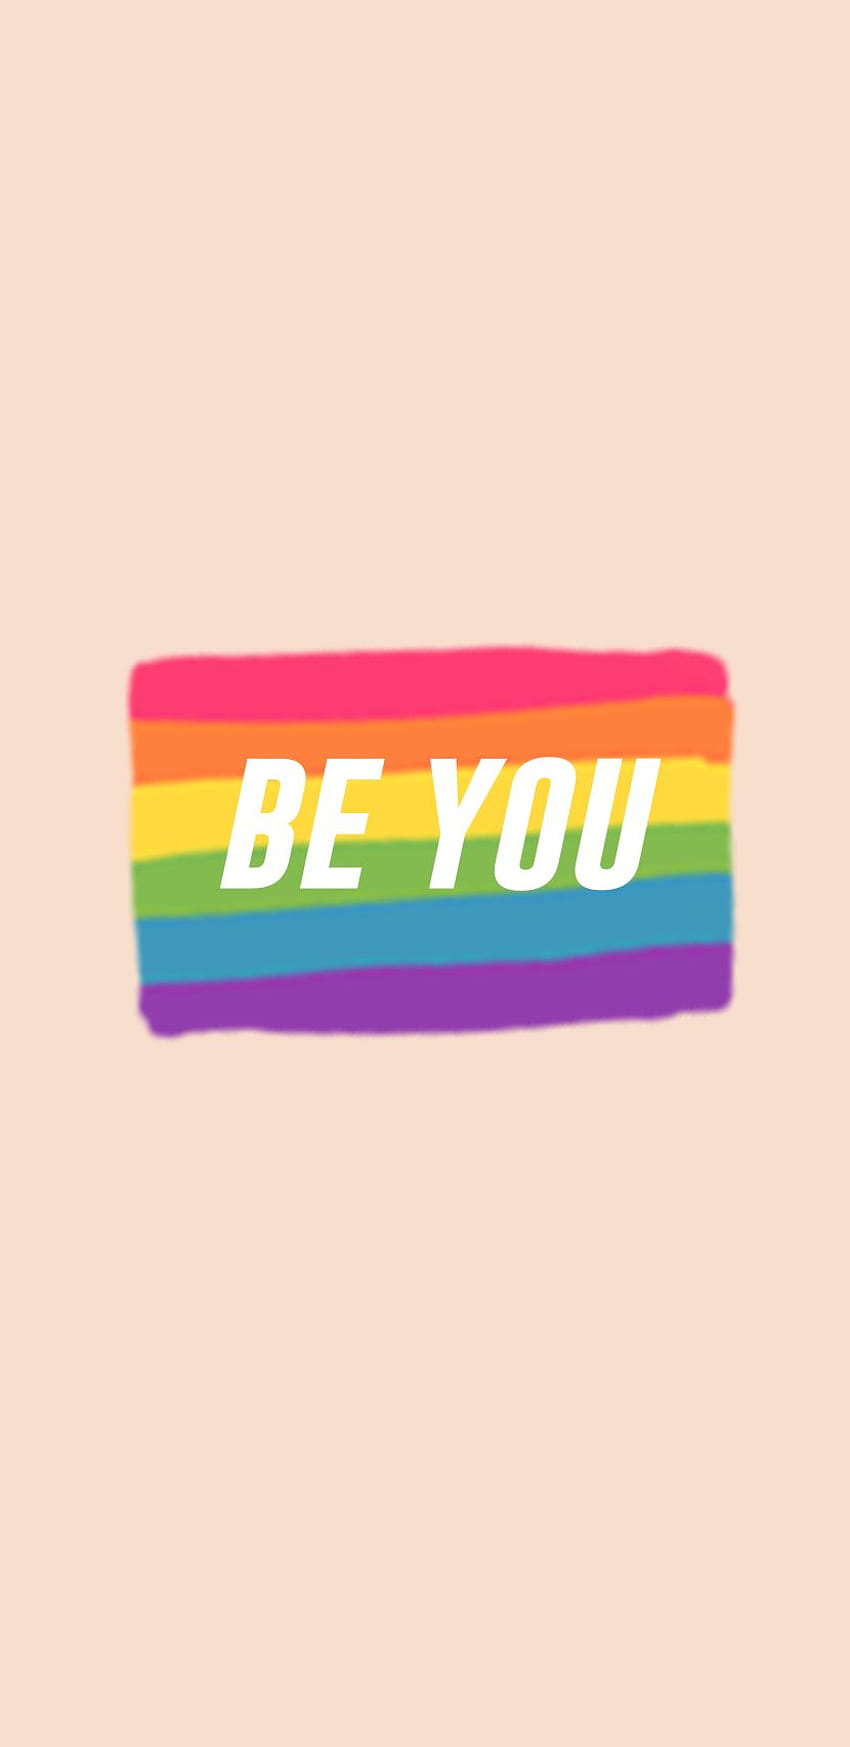 A rainbow colored be you sticker on an off white background - LGBT, pride